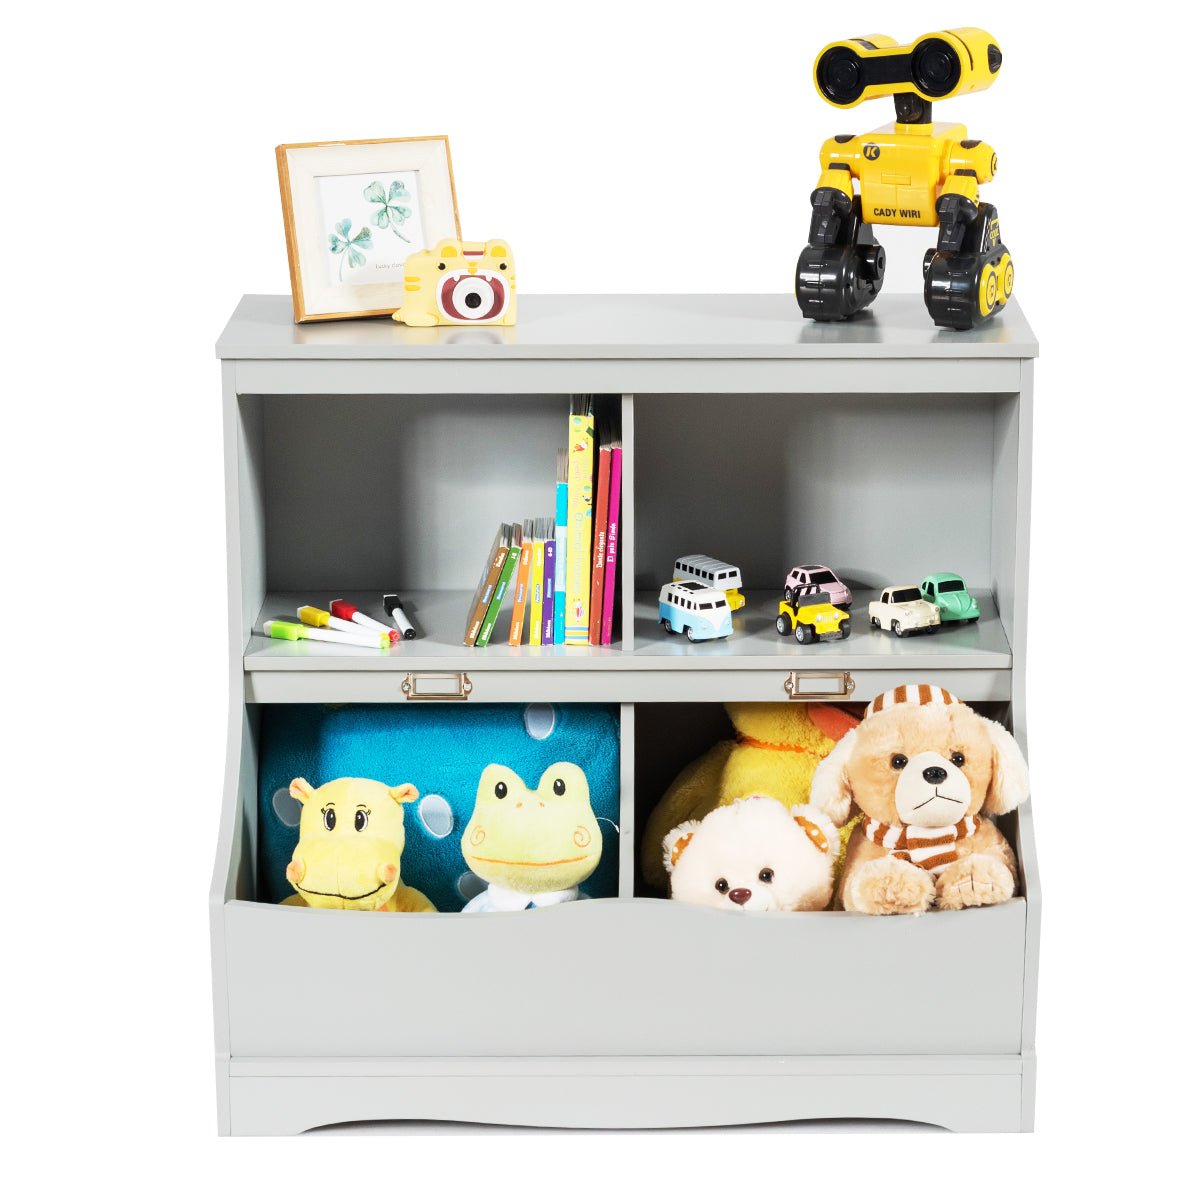  2 Tier Grey Toy Shelf - Lacquered Surface for Smart Room Organization